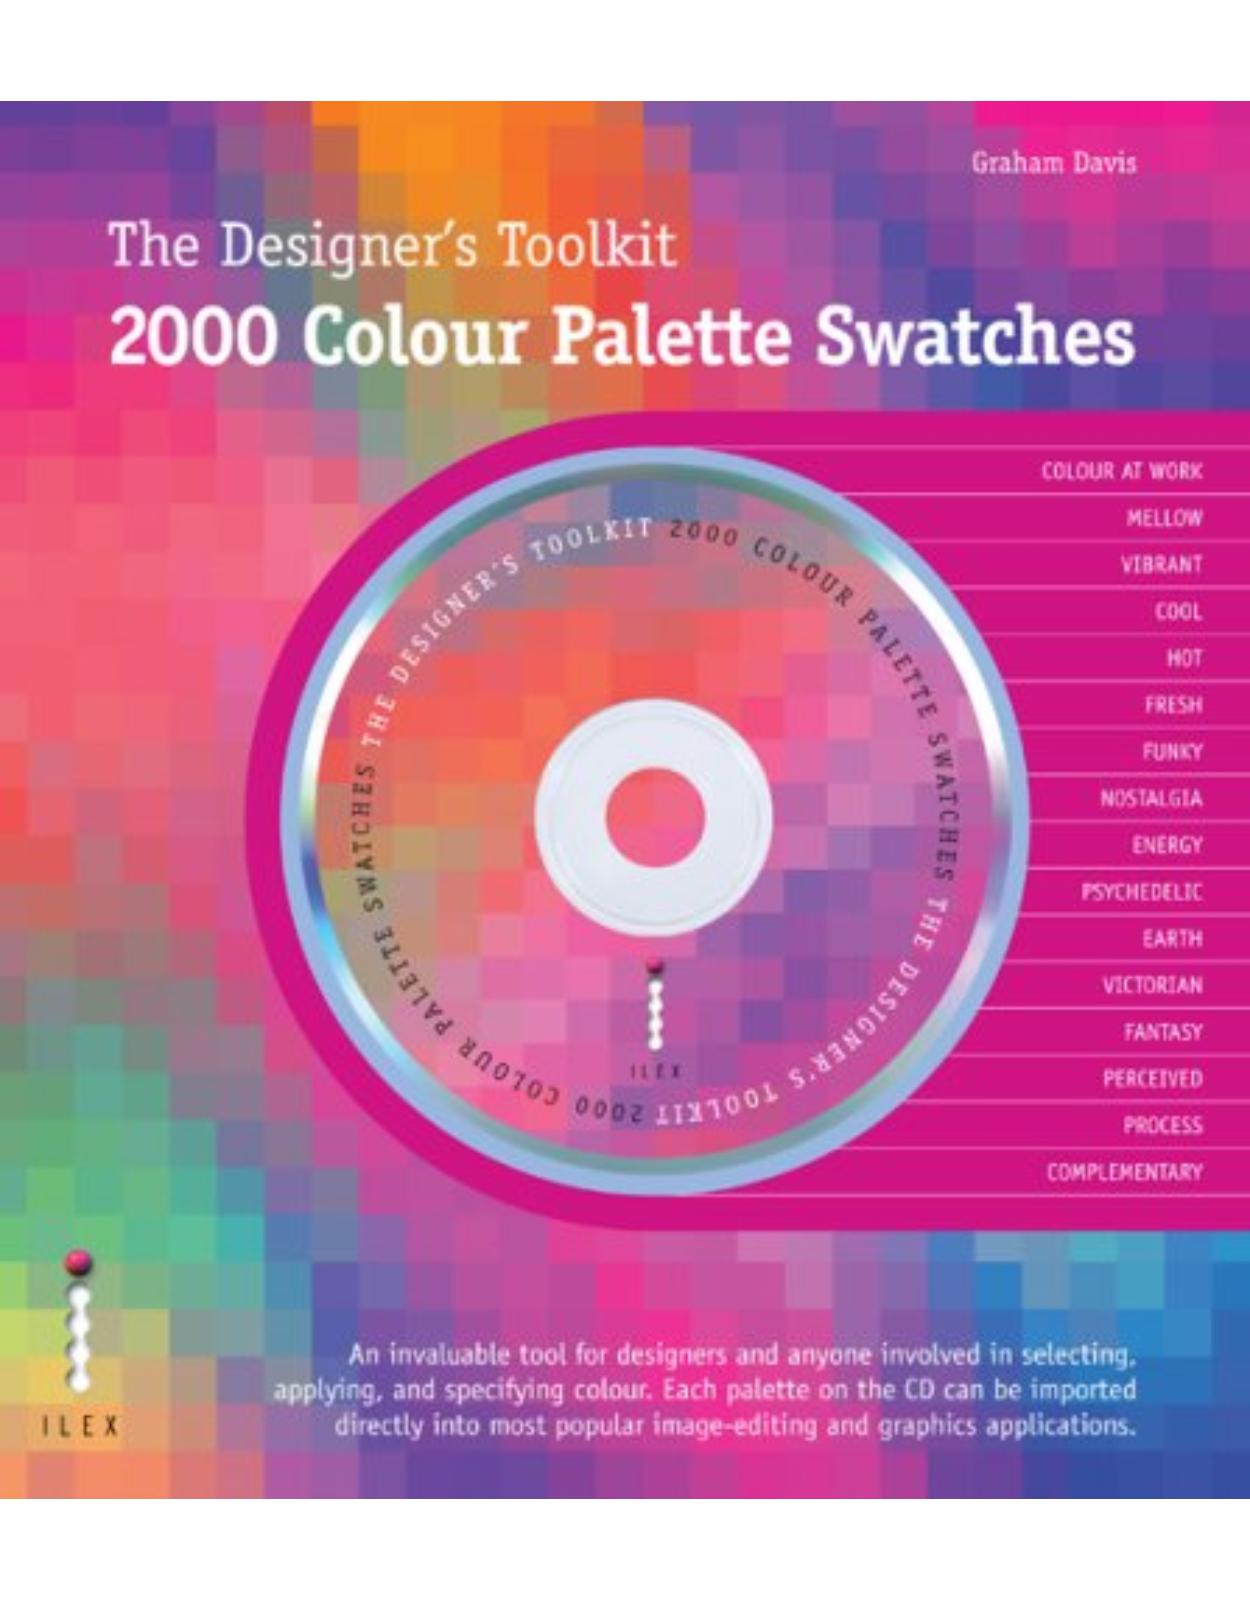 The Designers Toolkit: 2000 Colour Palette Swatches